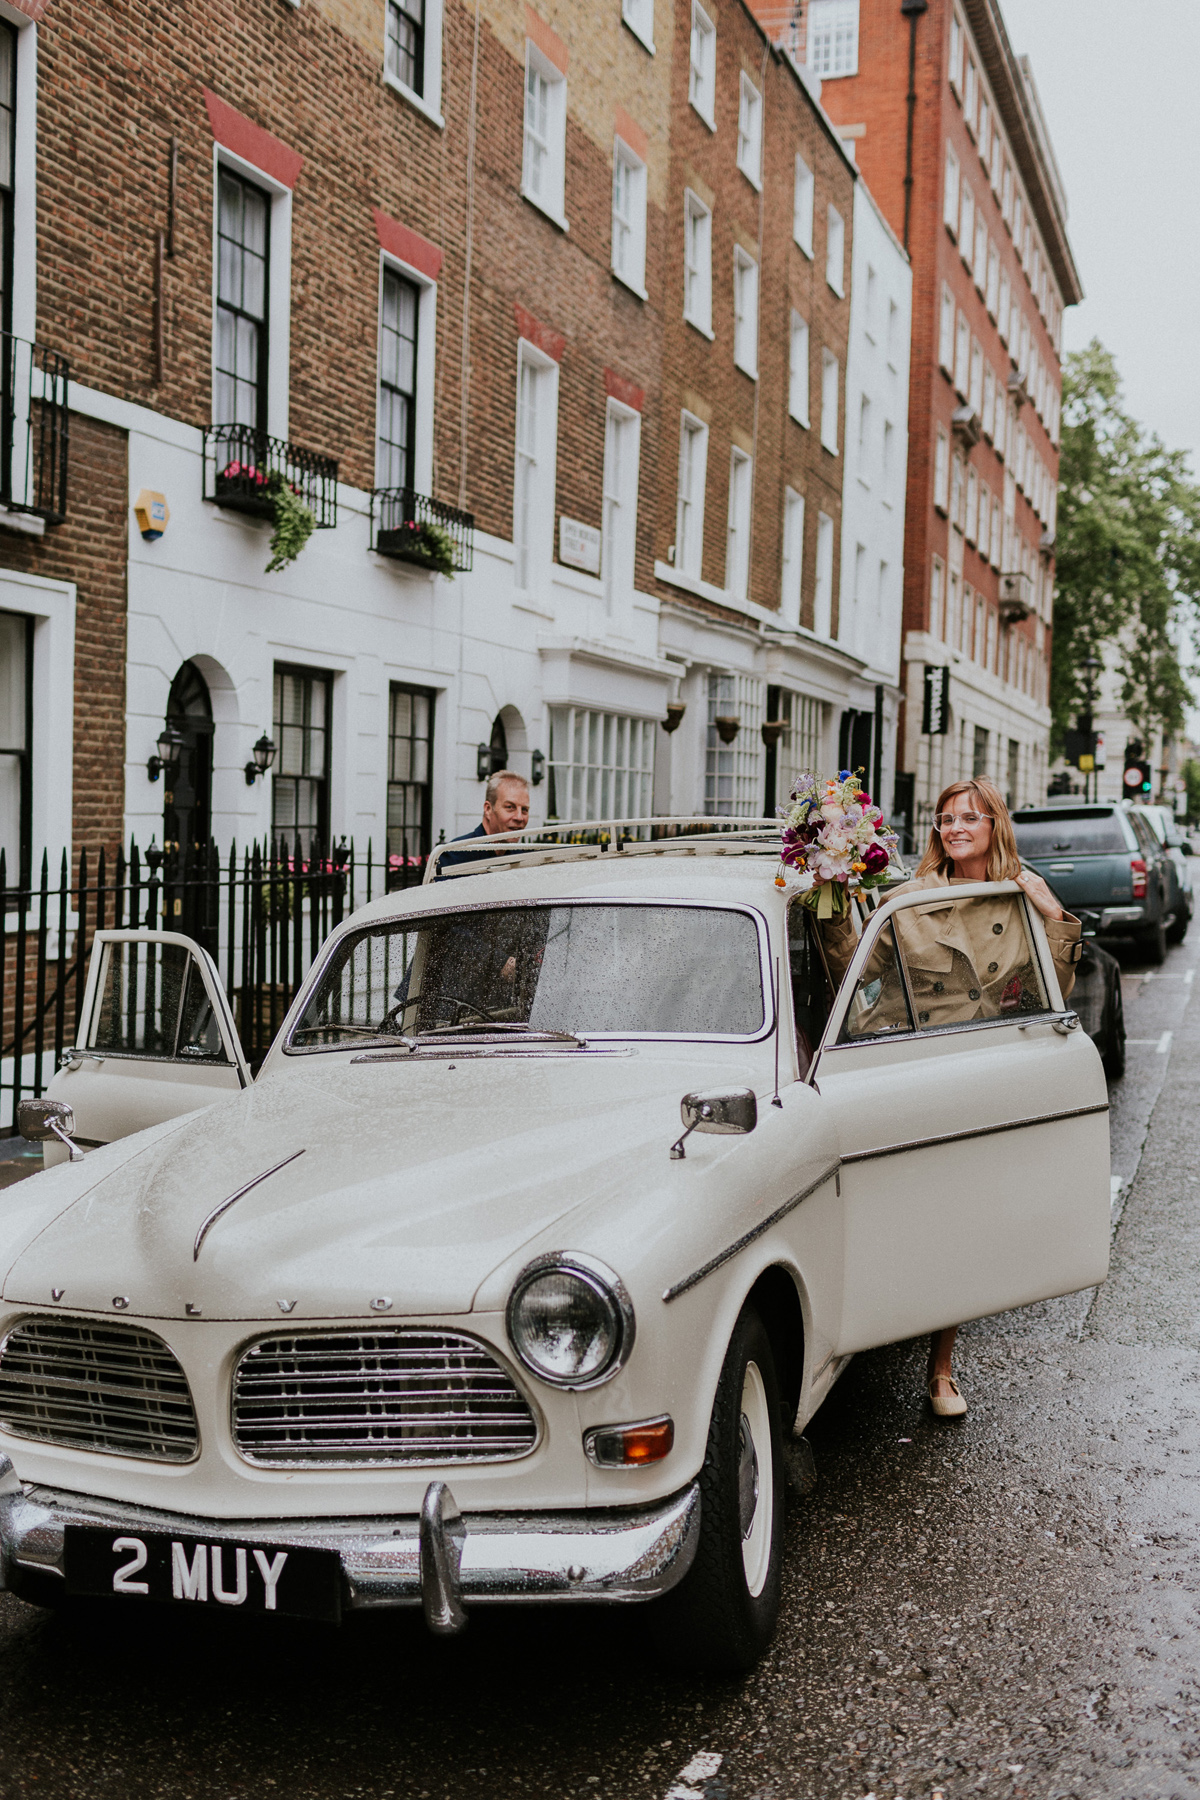 Polka dot dress intimate London wedding  - A Ruffled Polka Dot Dress and Vintage Wicker Bag for an Intimate, Rainy Day London Wedding with Afternoon Tea